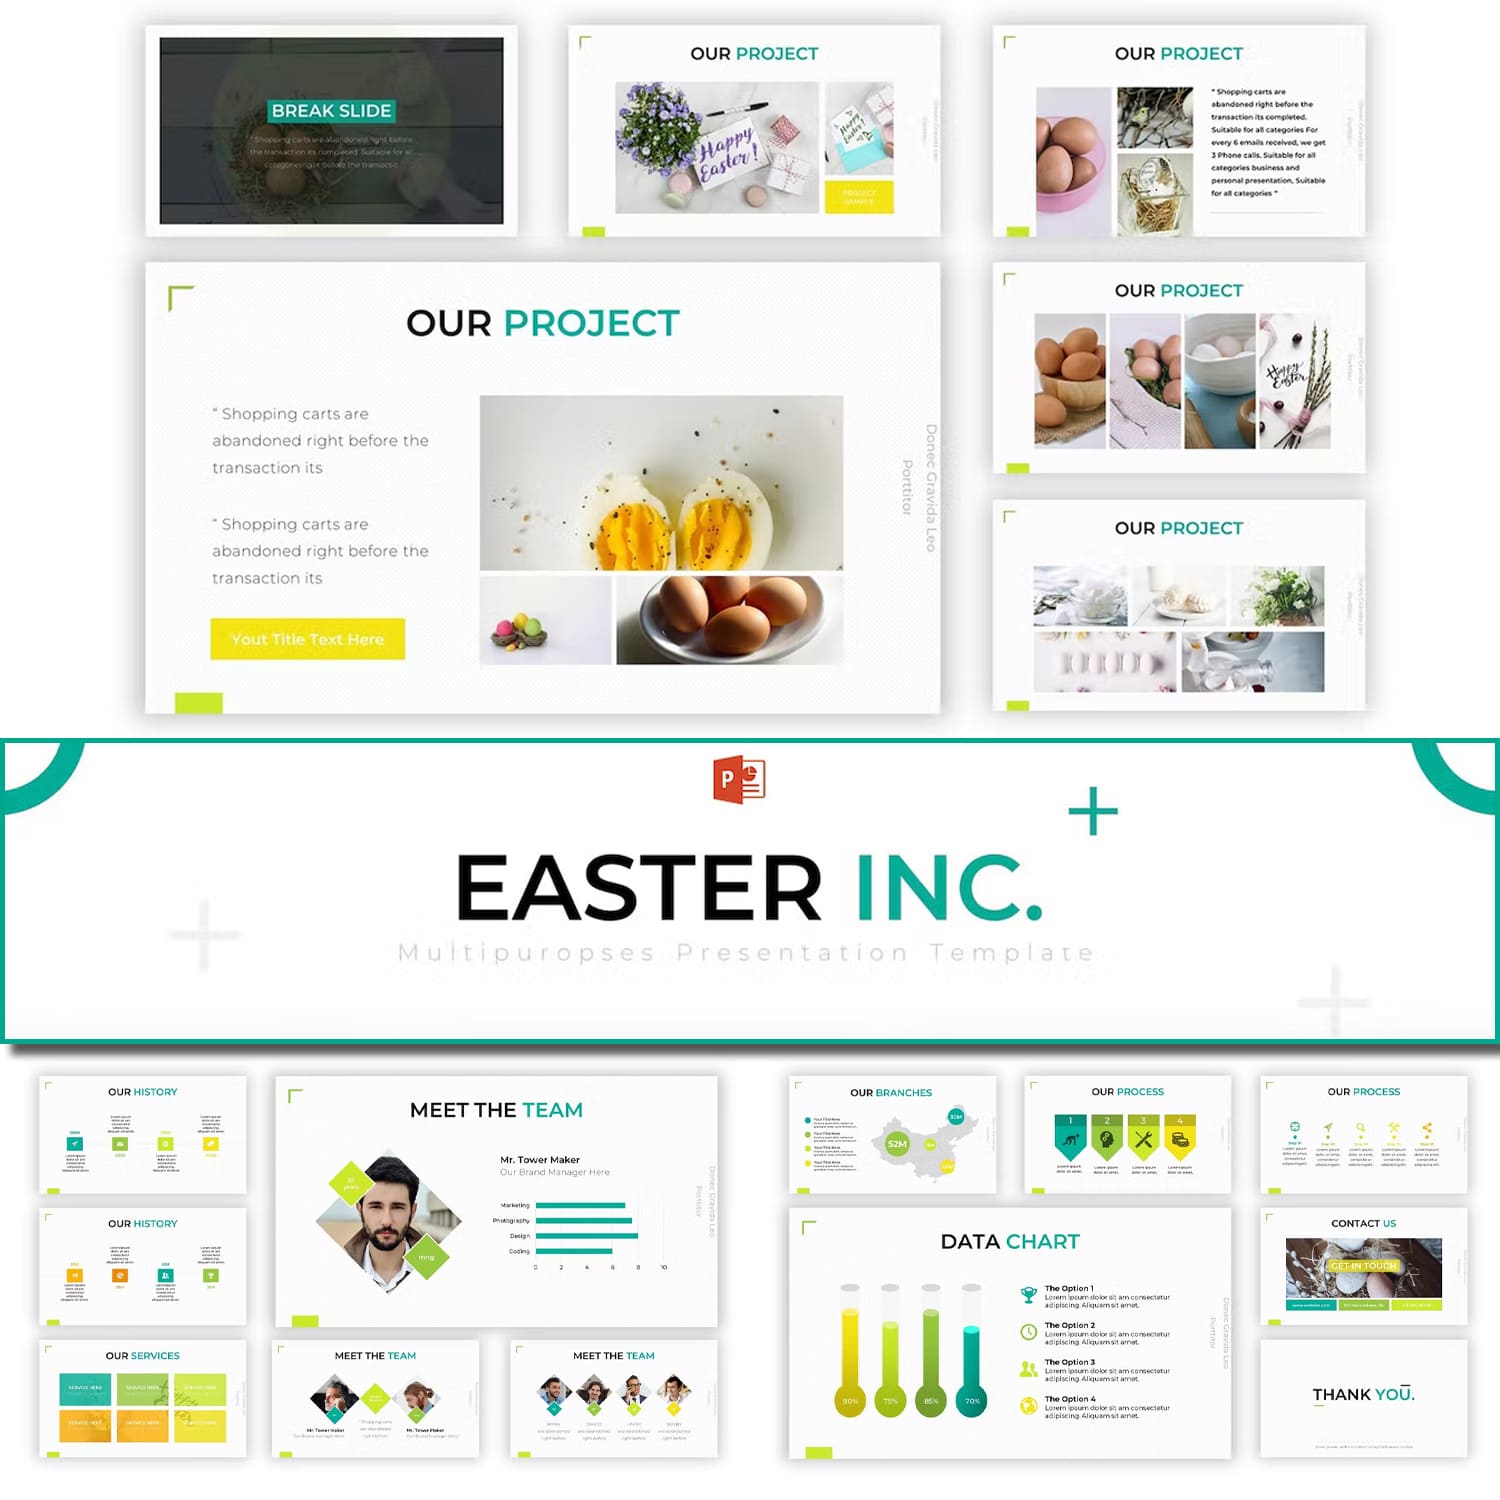 Easter inc powerpoint template - main image preview.